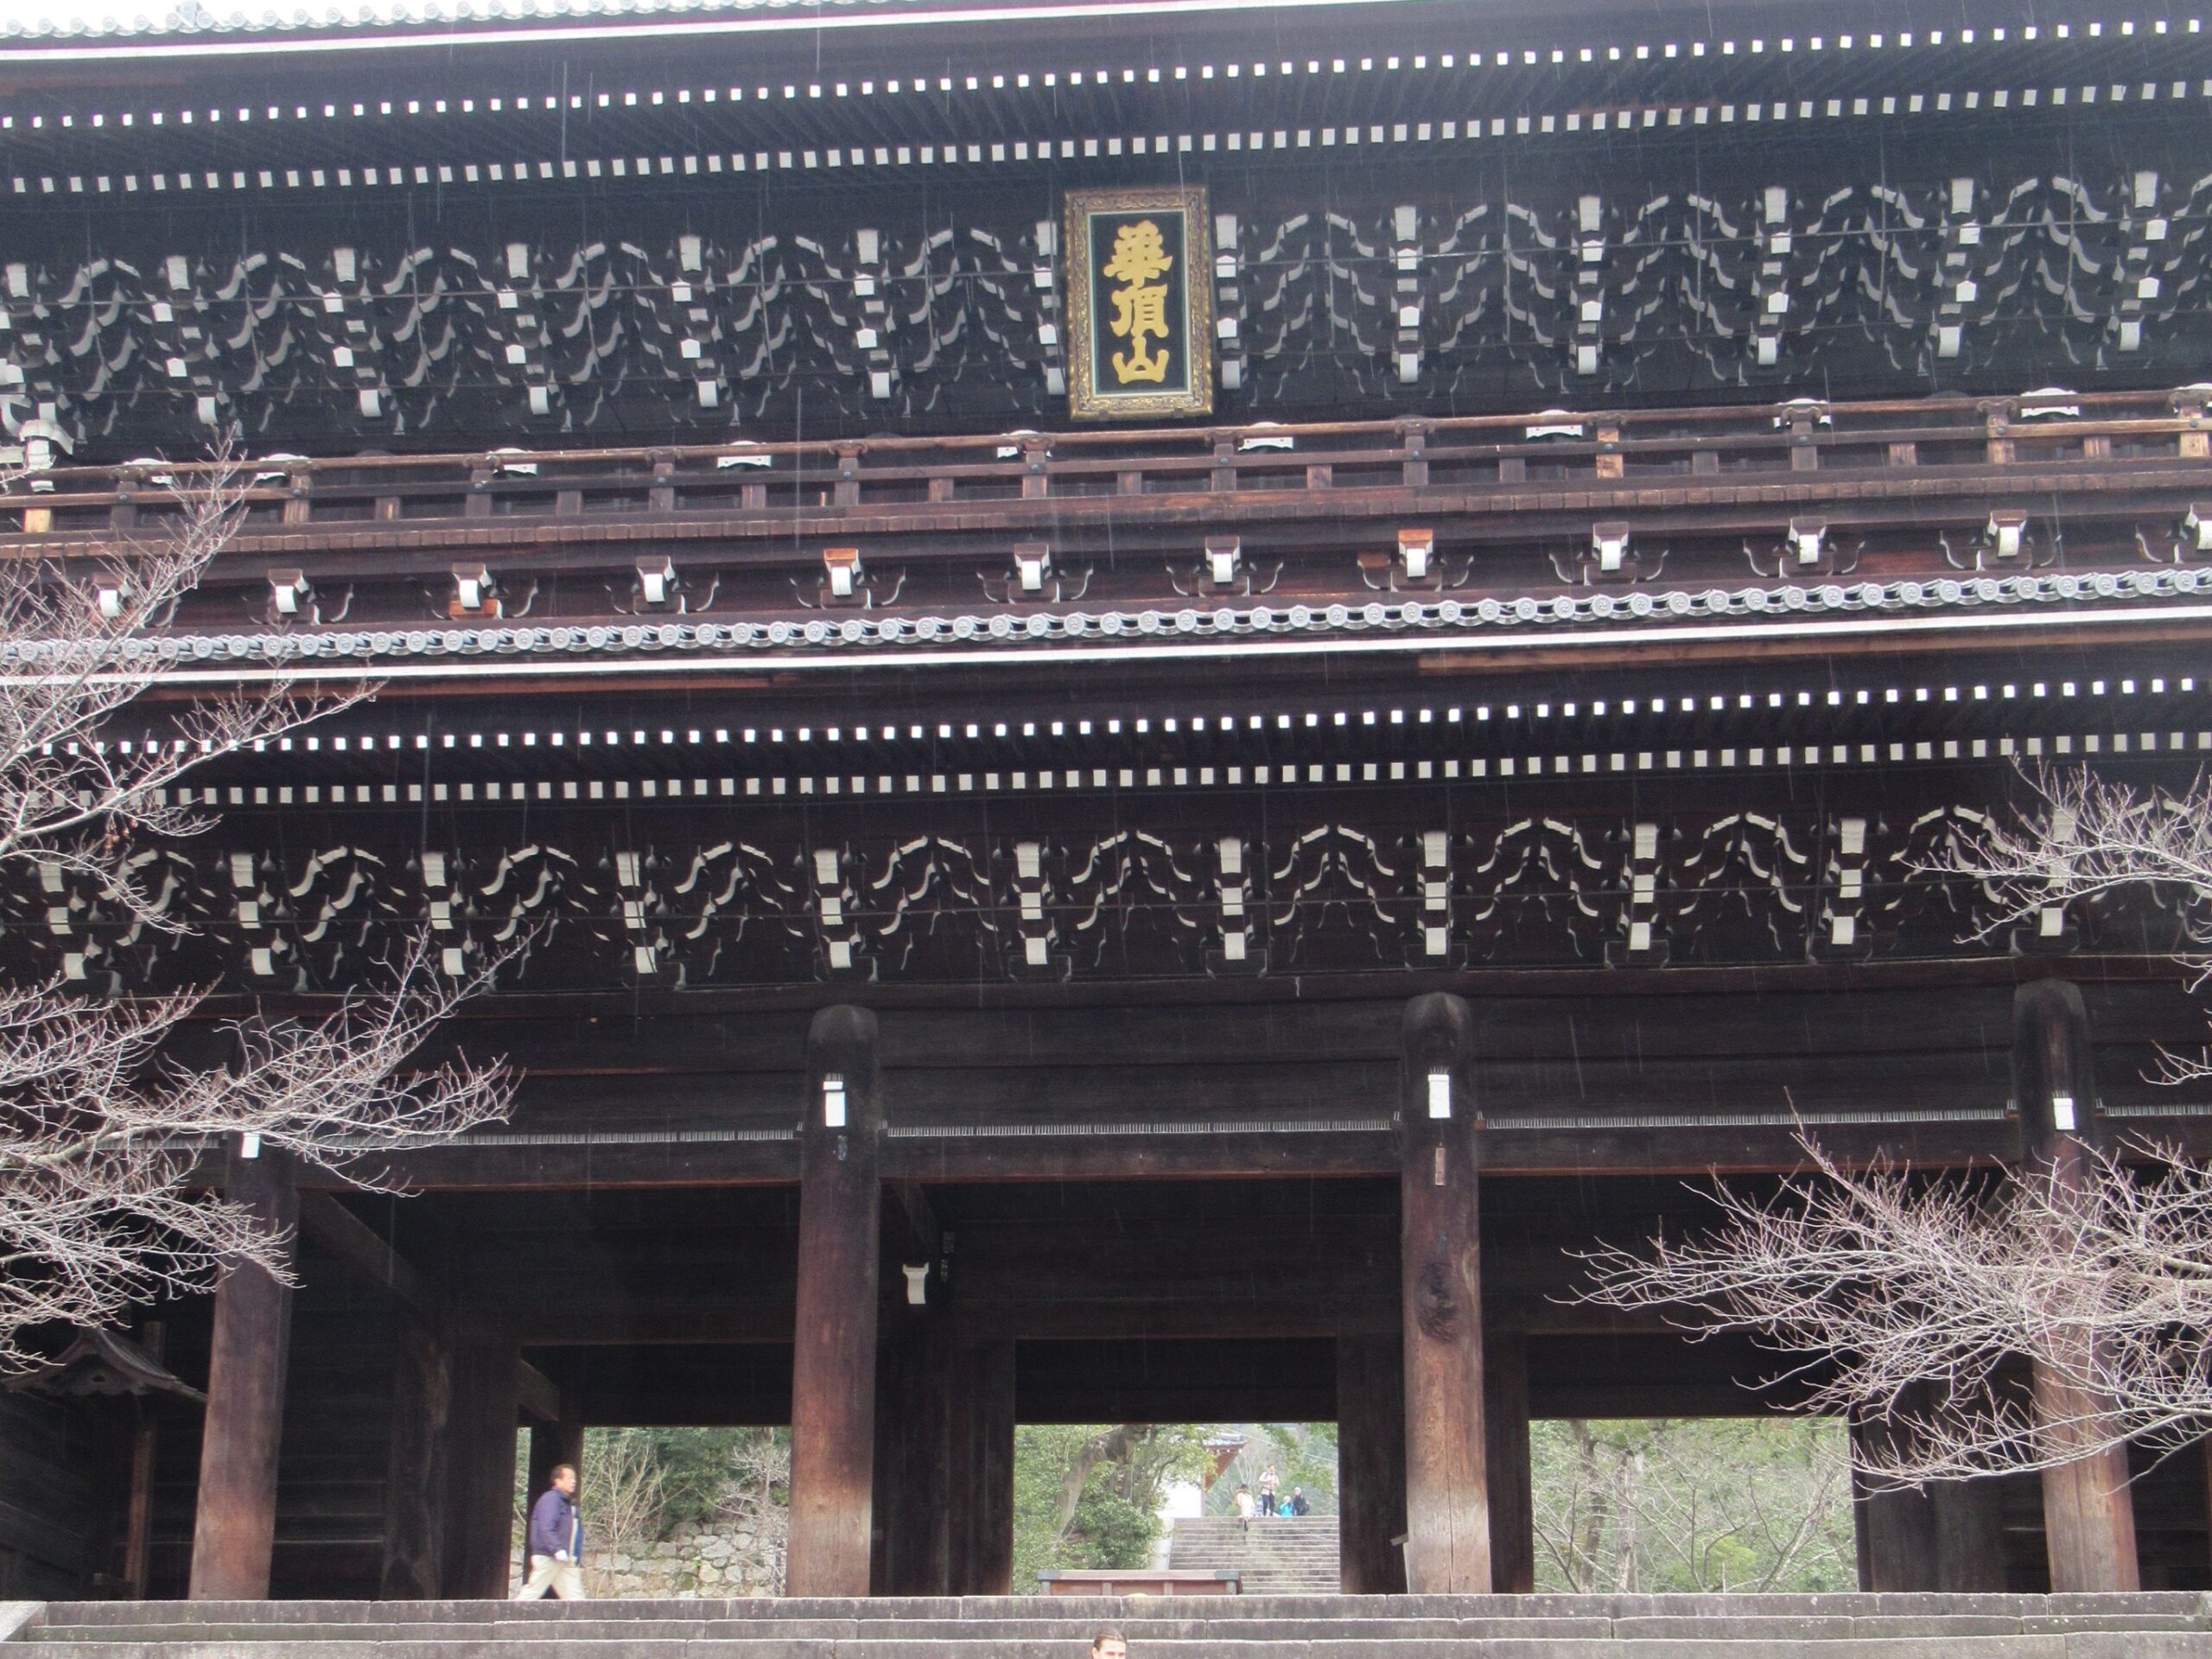 Front gate of the Chionin Temple in Kyoto, Japan